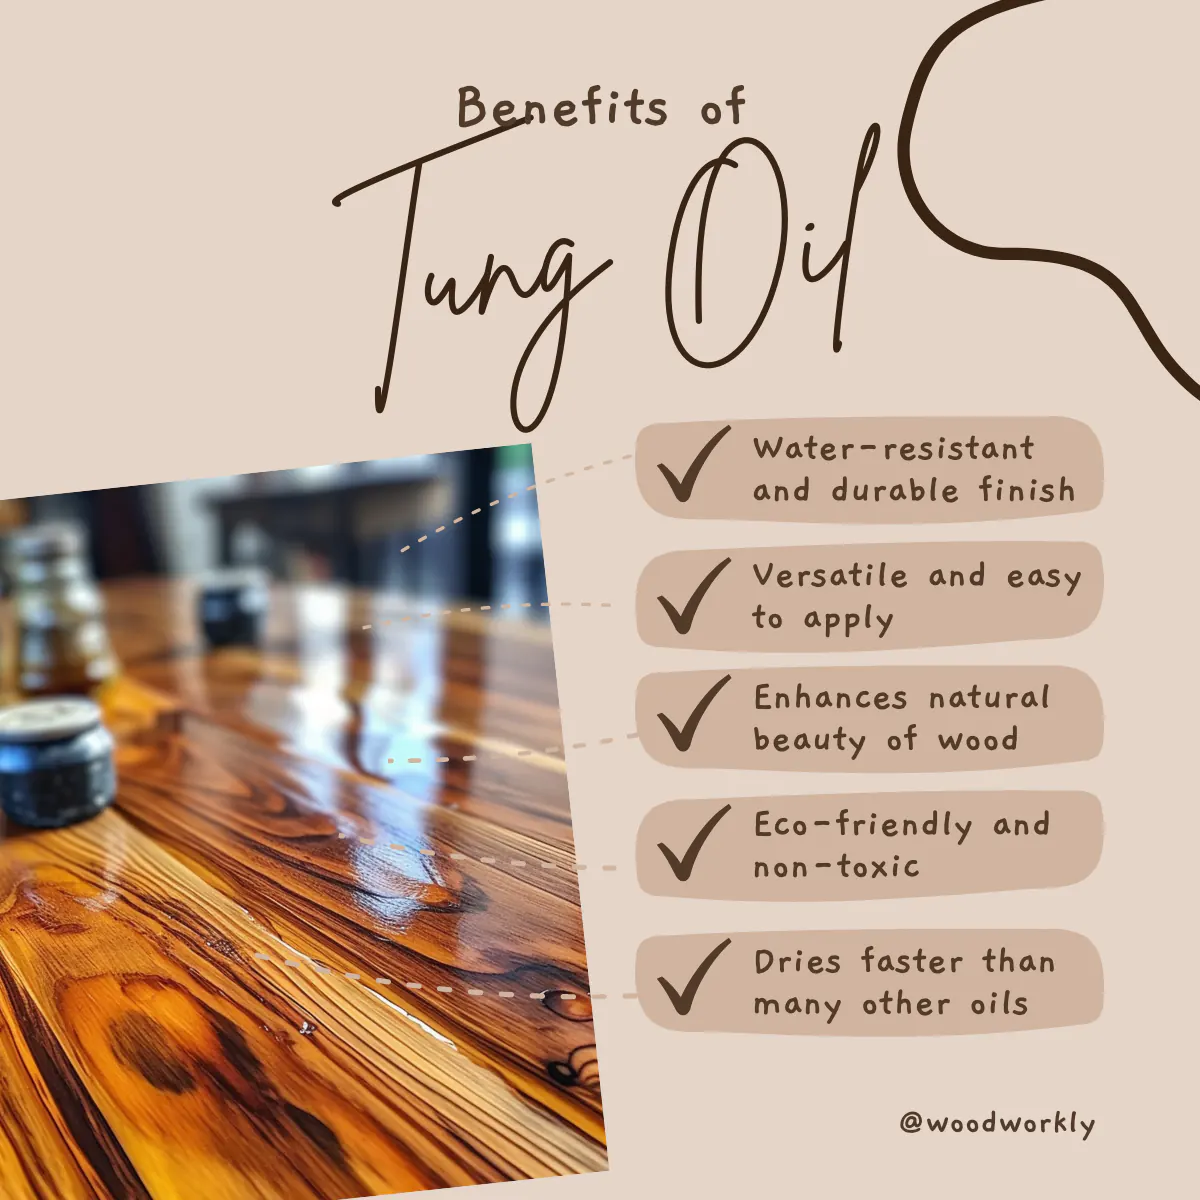 Benefits of Tung oil